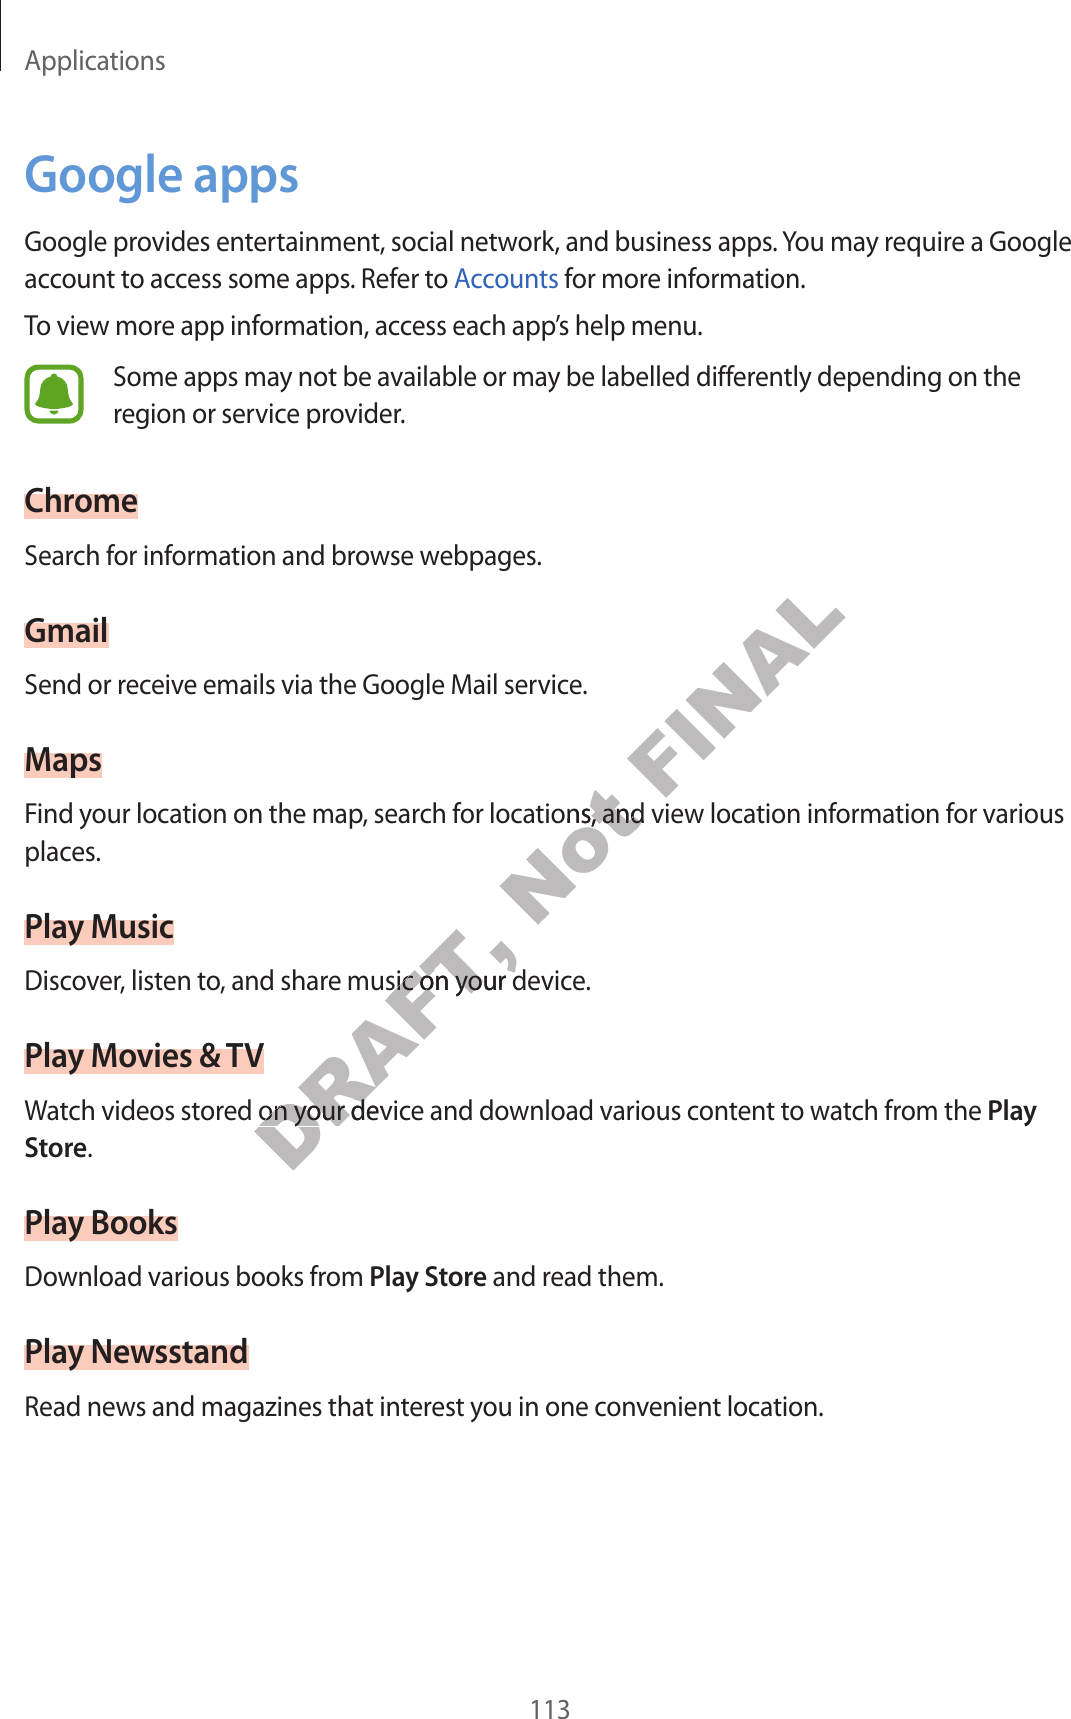 Applications113Google appsGoogle provides ent ertainment, social network, and business apps. You may require a Google account t o ac cess some apps . Ref er t o Accounts for mor e information.To view more app inf ormation, ac cess each app’s help menu.Some apps may not be available or ma y be labelled diff er en tly depending on the region or service provider.ChromeSearch for information and bro wse w ebpages.GmailSend or receiv e emails via the Google Mail service.MapsF ind y our loca tion on the map, search for locations , and view loca tion inf ormation f or v arious places.Play MusicDiscov er, listen to, and share music on your device .Play Mo vies &amp; TVWatch videos stored on y our devic e and download v arious cont ent t o wa tch fr om the Play Store.Play BooksDownload various books from Play St or e and read them.Play Ne w sstandRead news and magazines that inter est y ou in one c on v enien t location.DRAFT, Discov er, listen to, and share music on your device .DRAFT, Discov er, listen to, and share music on your device .DRAFT, Watch videos stored on y our devic e and download v arious cont ent t o wa tch fr om the DRAFT, Watch videos stored on y our devic e and download v arious cont ent t o wa tch fr om the Not F ind y our loca tion on the map, search for locations , and view loca tion inf ormation f or v arious Not F ind y our loca tion on the map, search for locations , and view loca tion inf ormation f or v arious FINAL